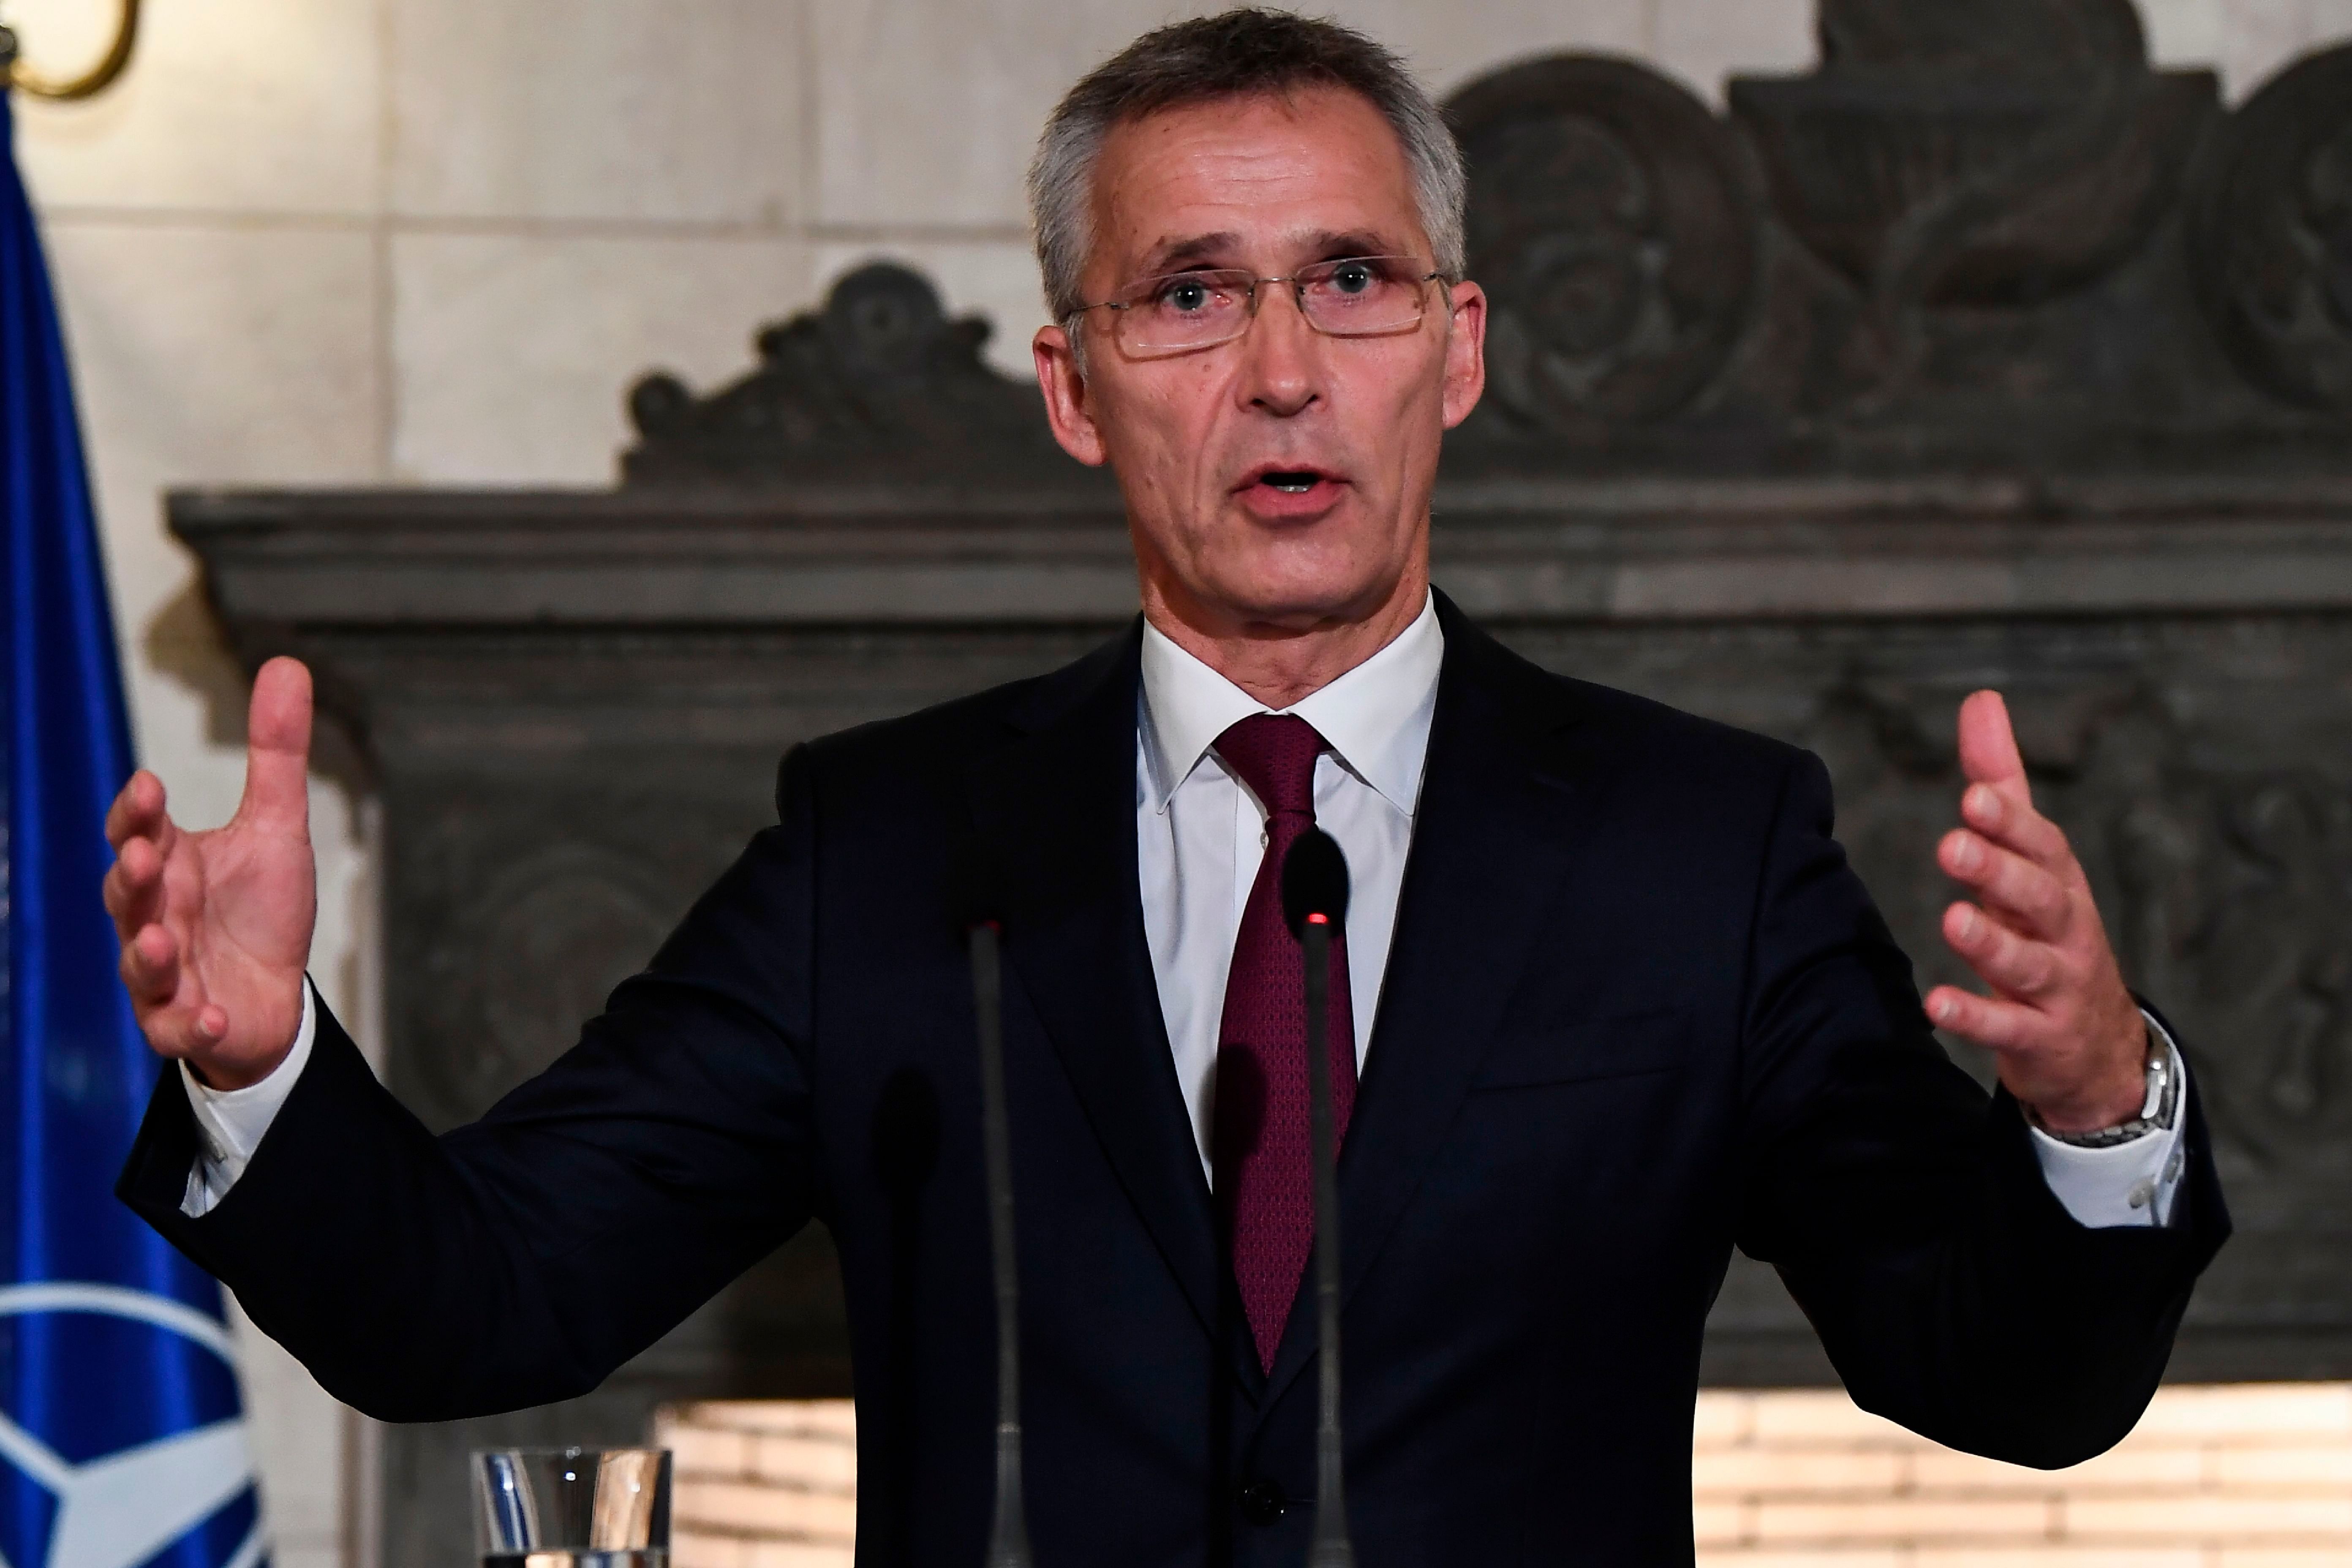 NATO's General Secretary Jens Stoltenberg adrresses a press conference after his meeting with Greek Prime Minister in Athens. (AFP Photo)